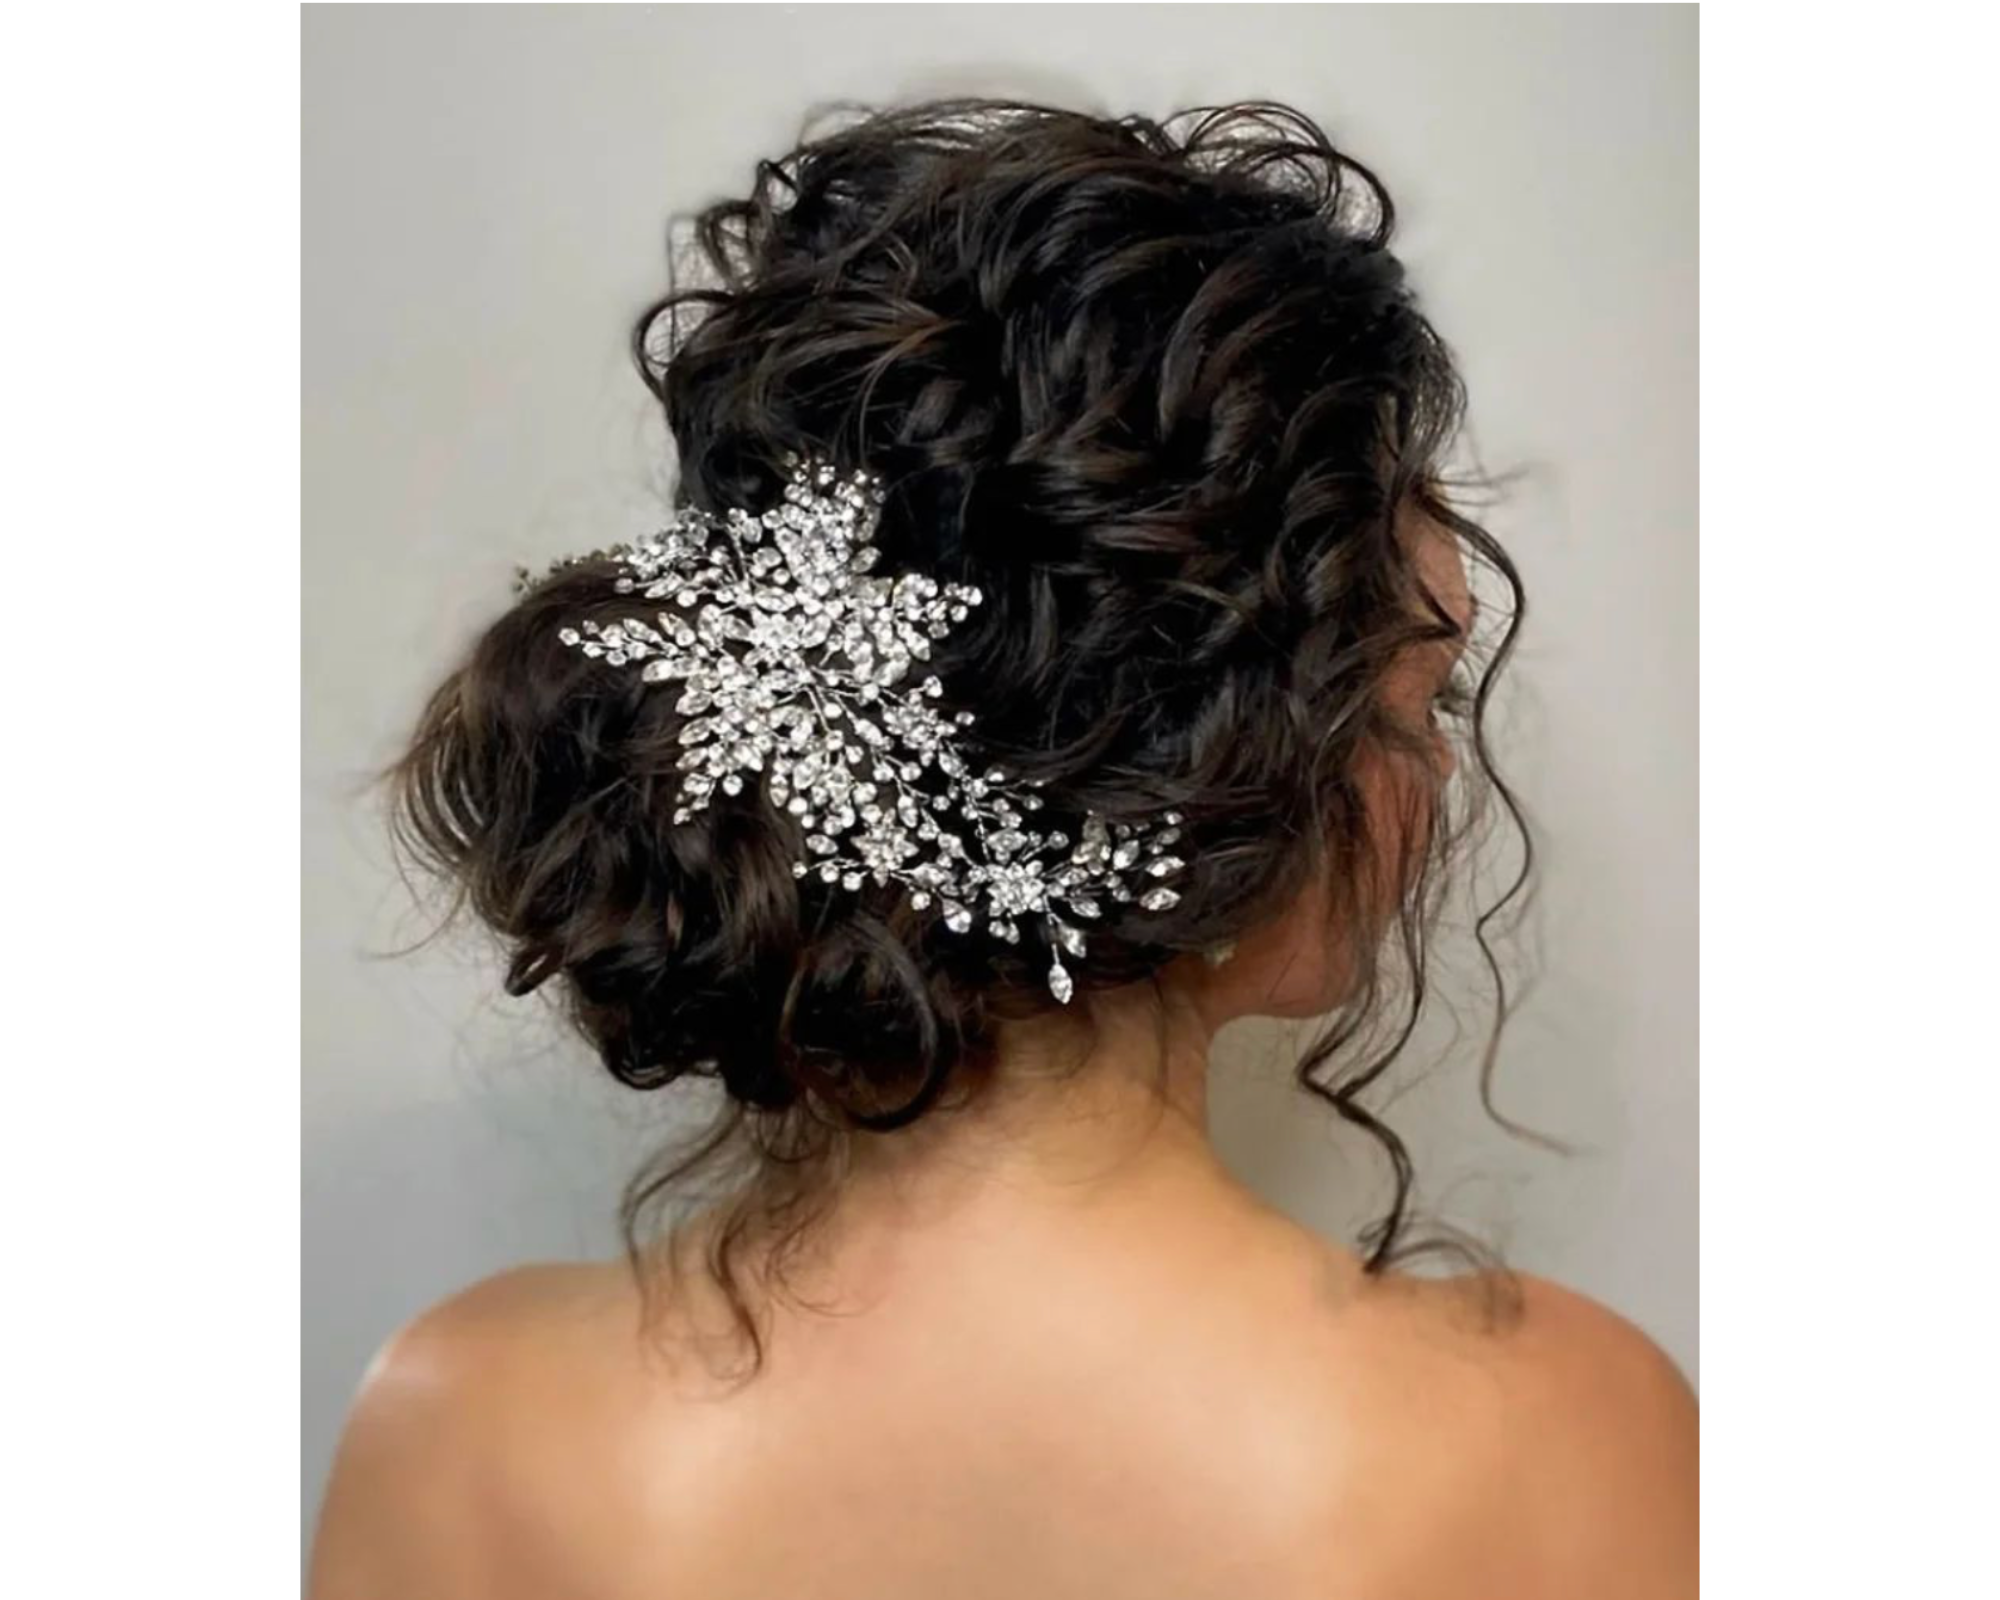 A bride wearing her curly hair in a romantic updo with a Swarovski crystal wedding tiara.